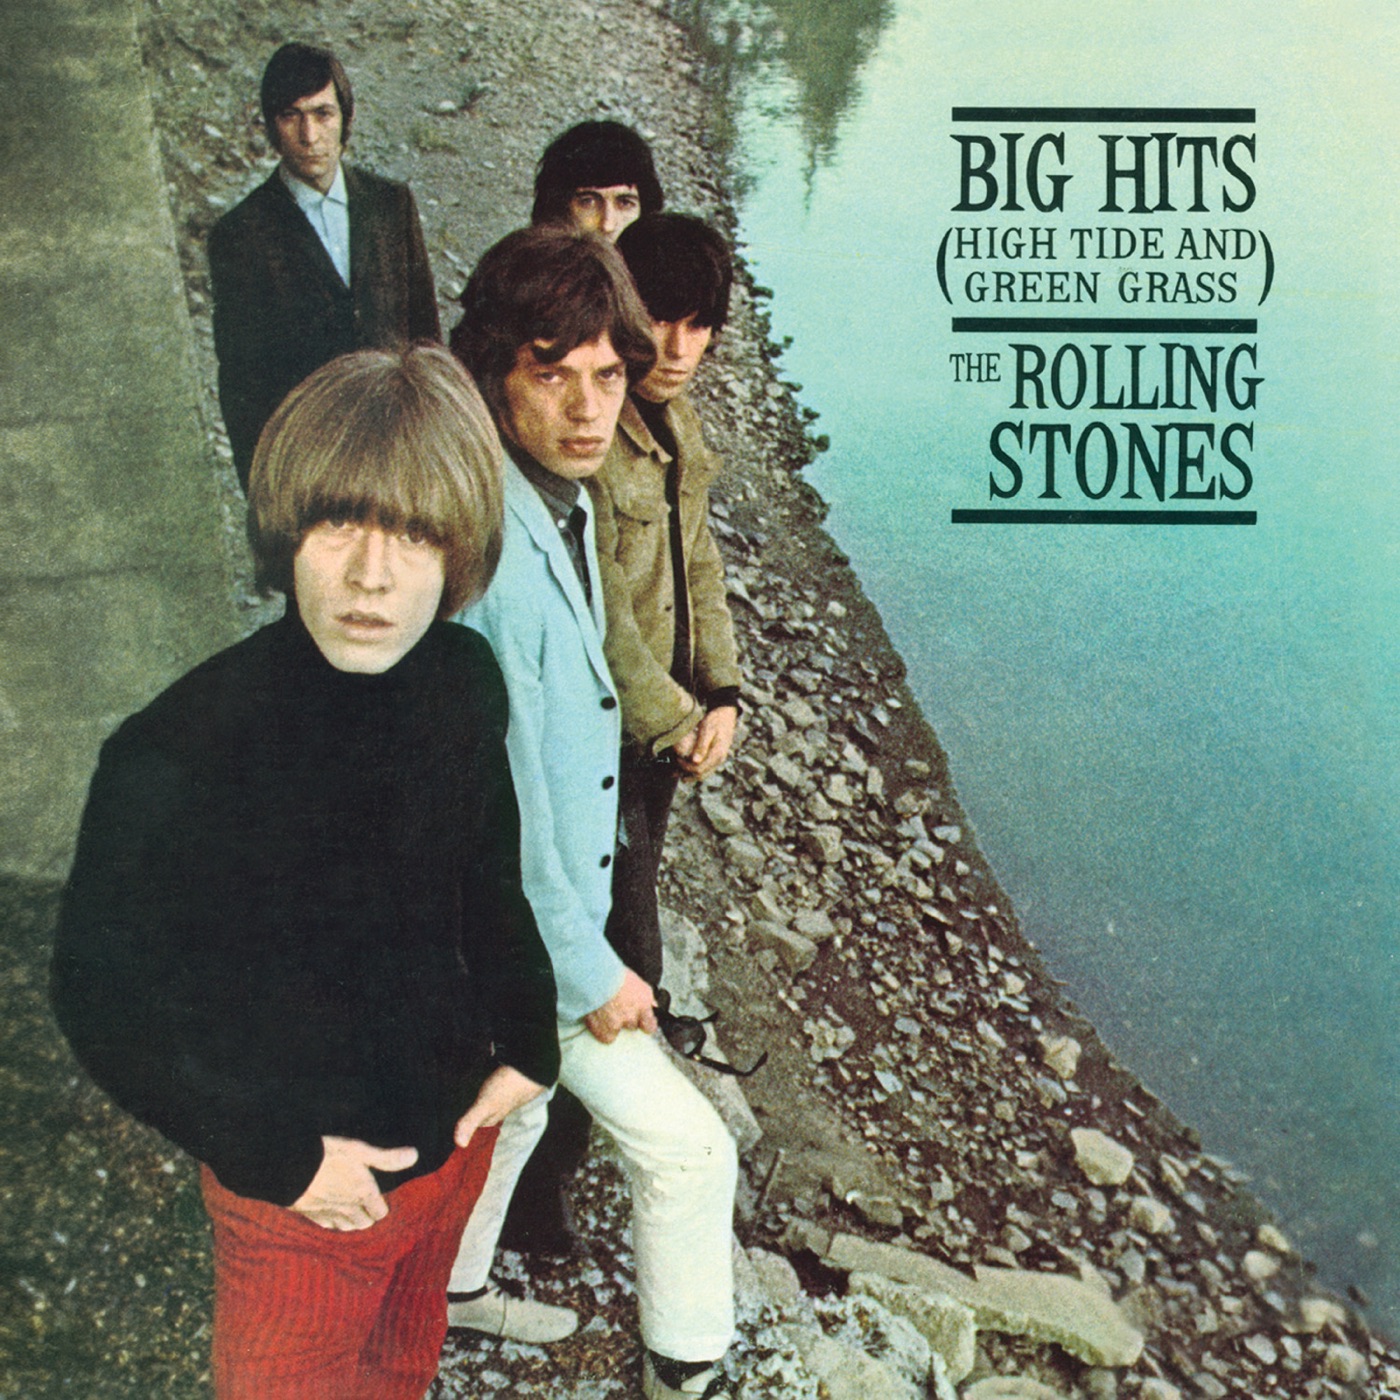 Big Hits (High Tide and Green Grass) by The Rolling Stones